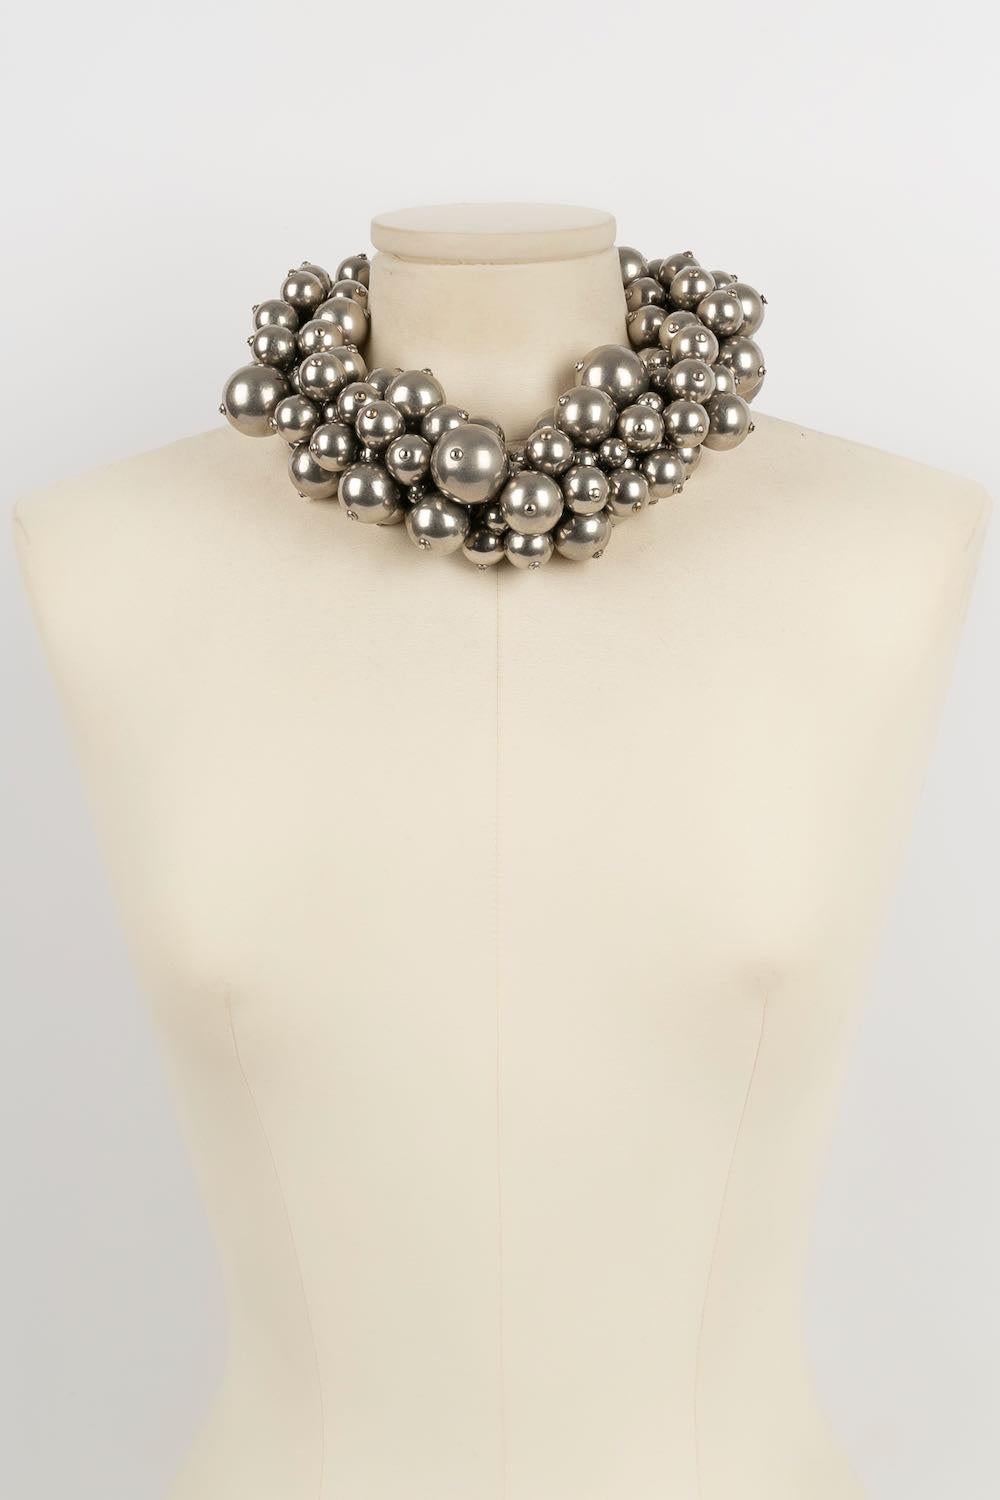 Chanel Necklace in Silver Metal Spheres In Excellent Condition For Sale In SAINT-OUEN-SUR-SEINE, FR